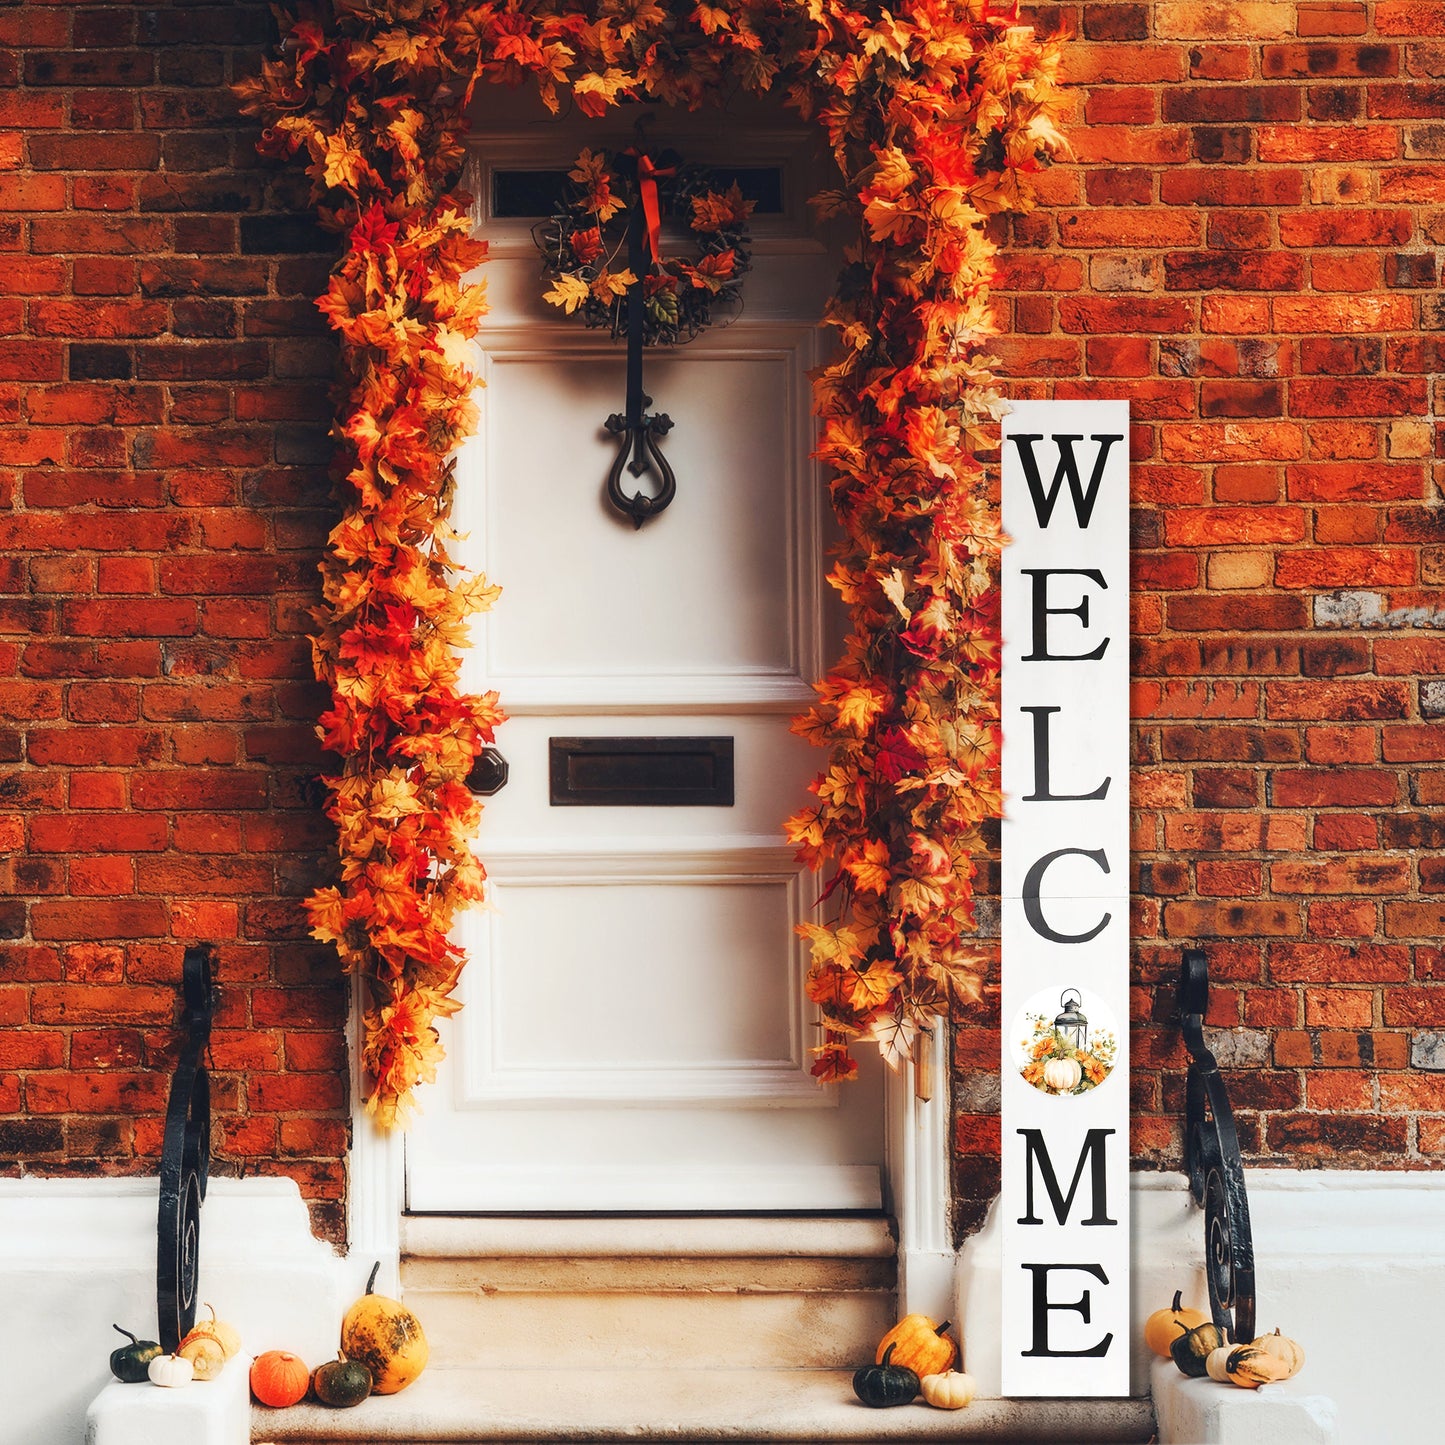 72in "Welcome" Fall Porch Sign with Lantern Design - White Porch Board Decor for Front Door during Autumn and Thanksgiving Celebrations